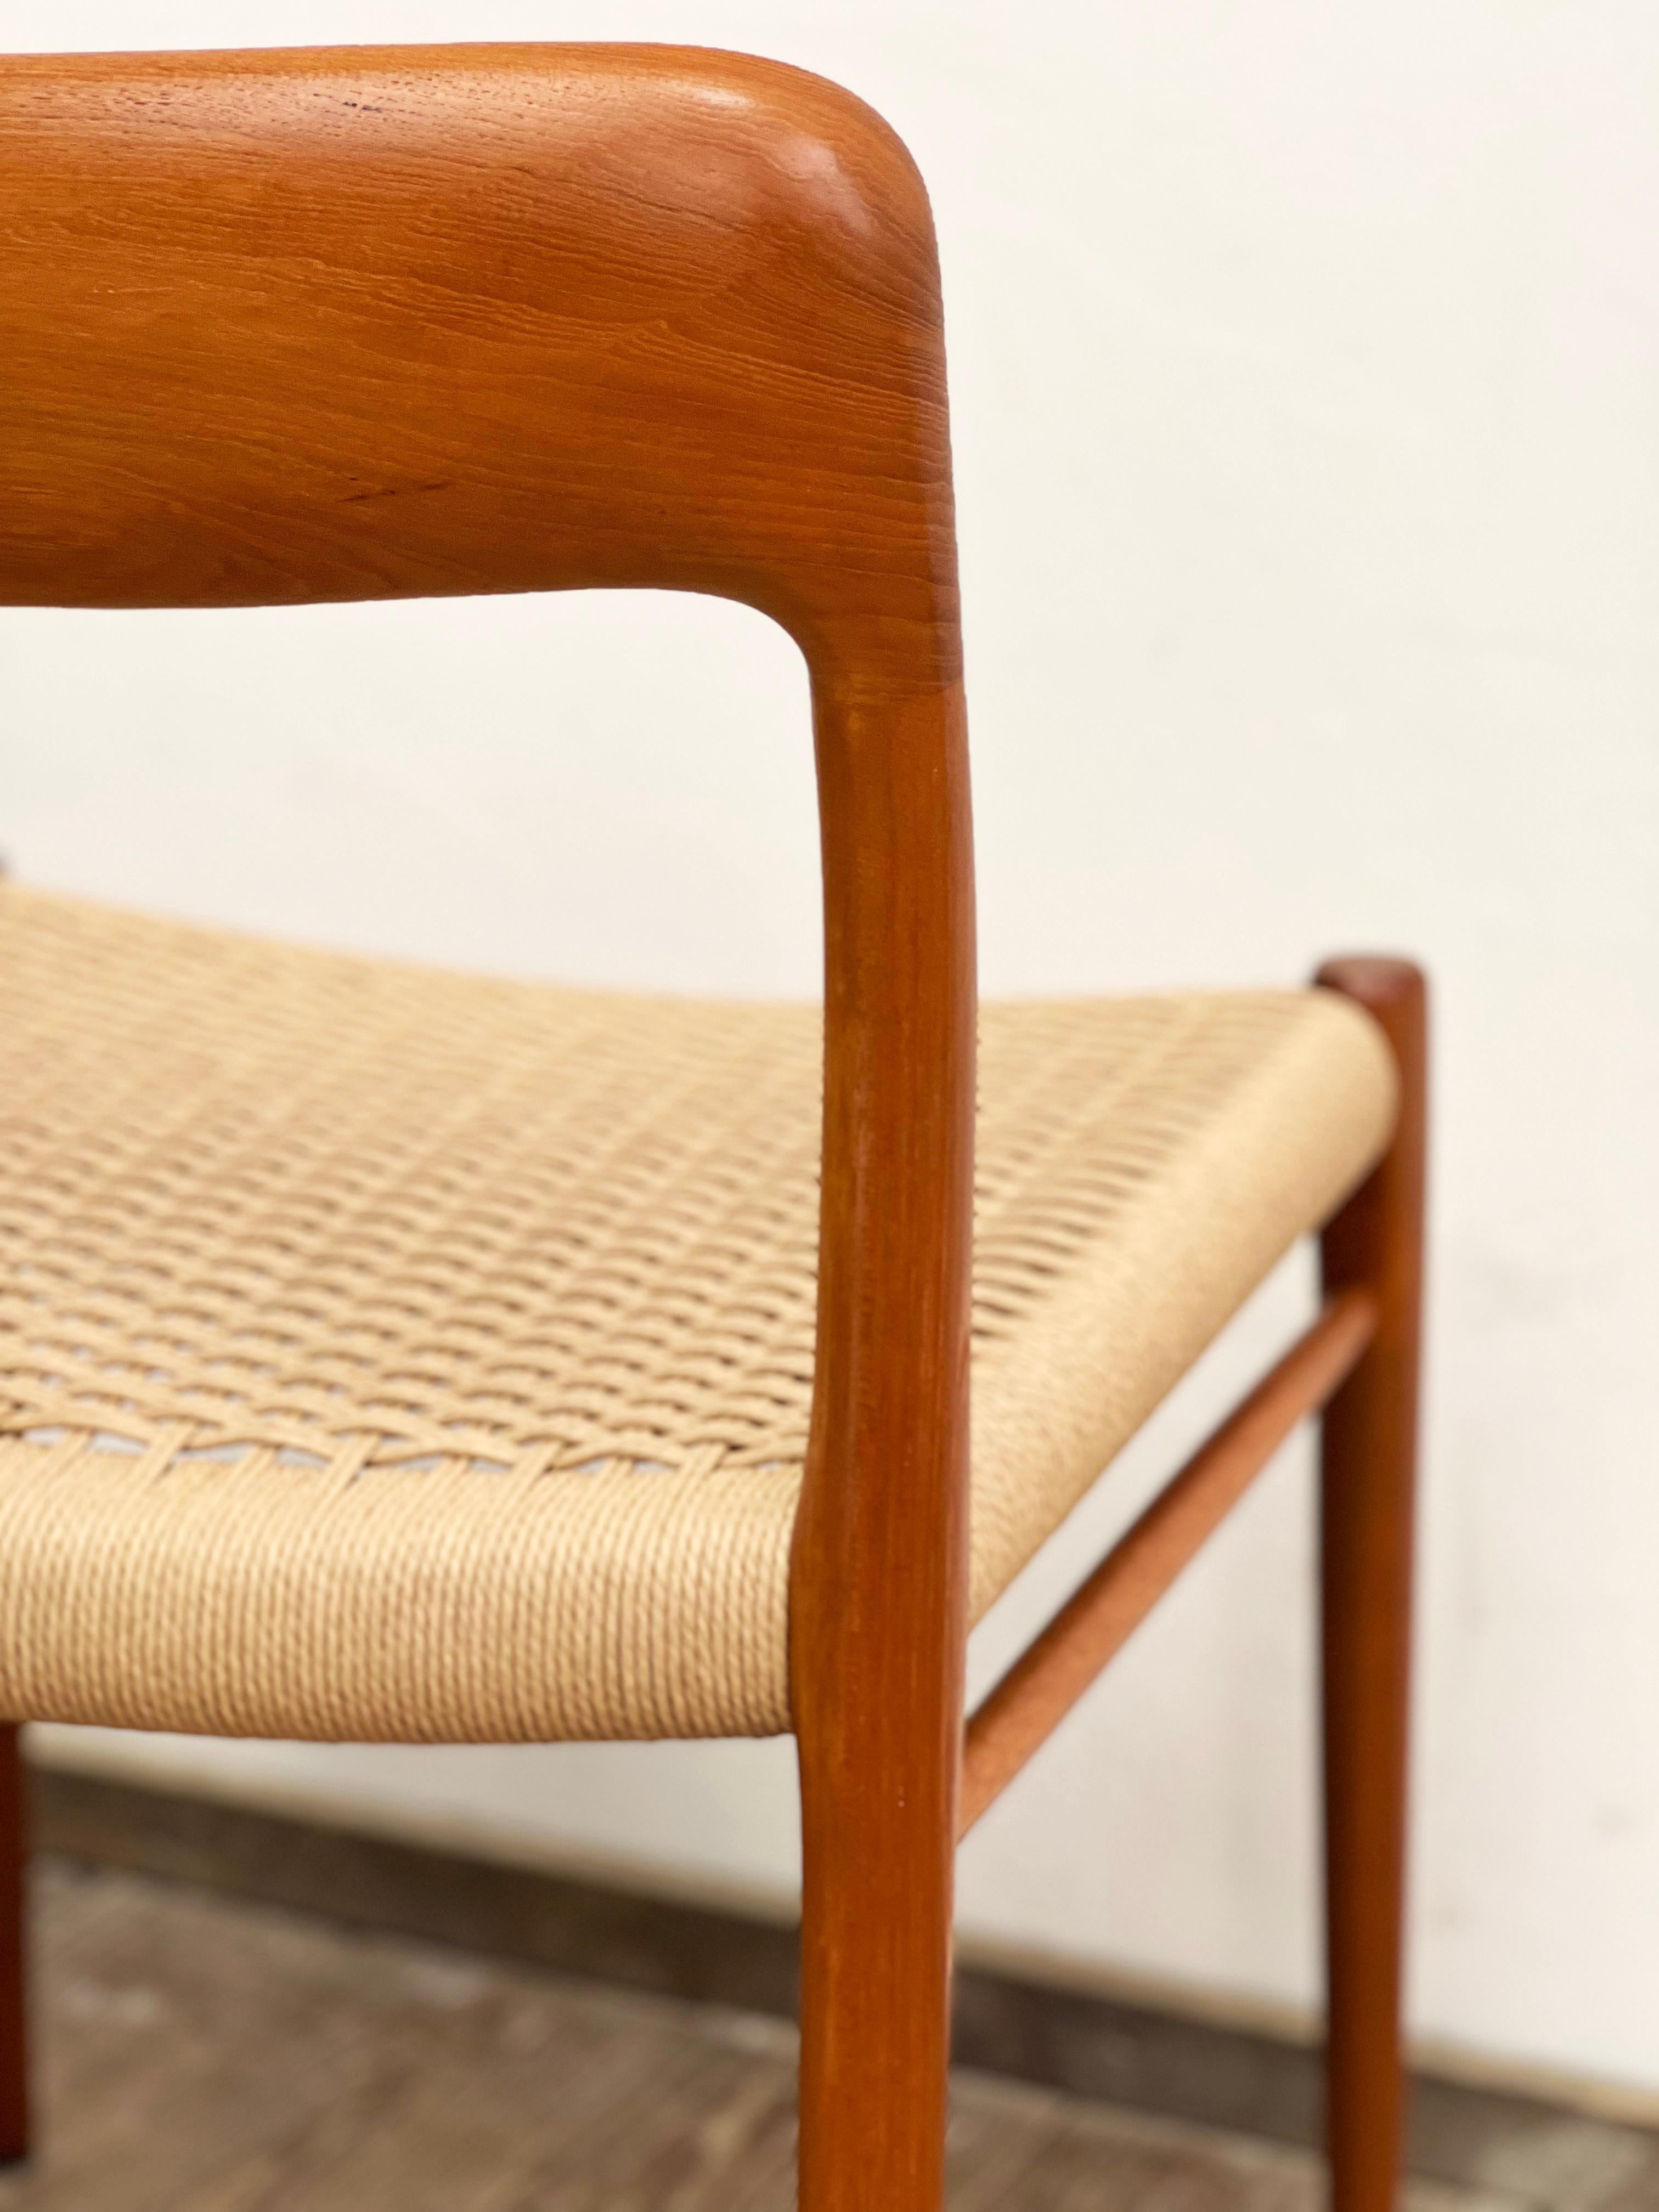 Mid-20th Century Mid-Century Teak Dining Chairs #75 by Niels O. Møller for J. L. Moller, Set of 2 For Sale